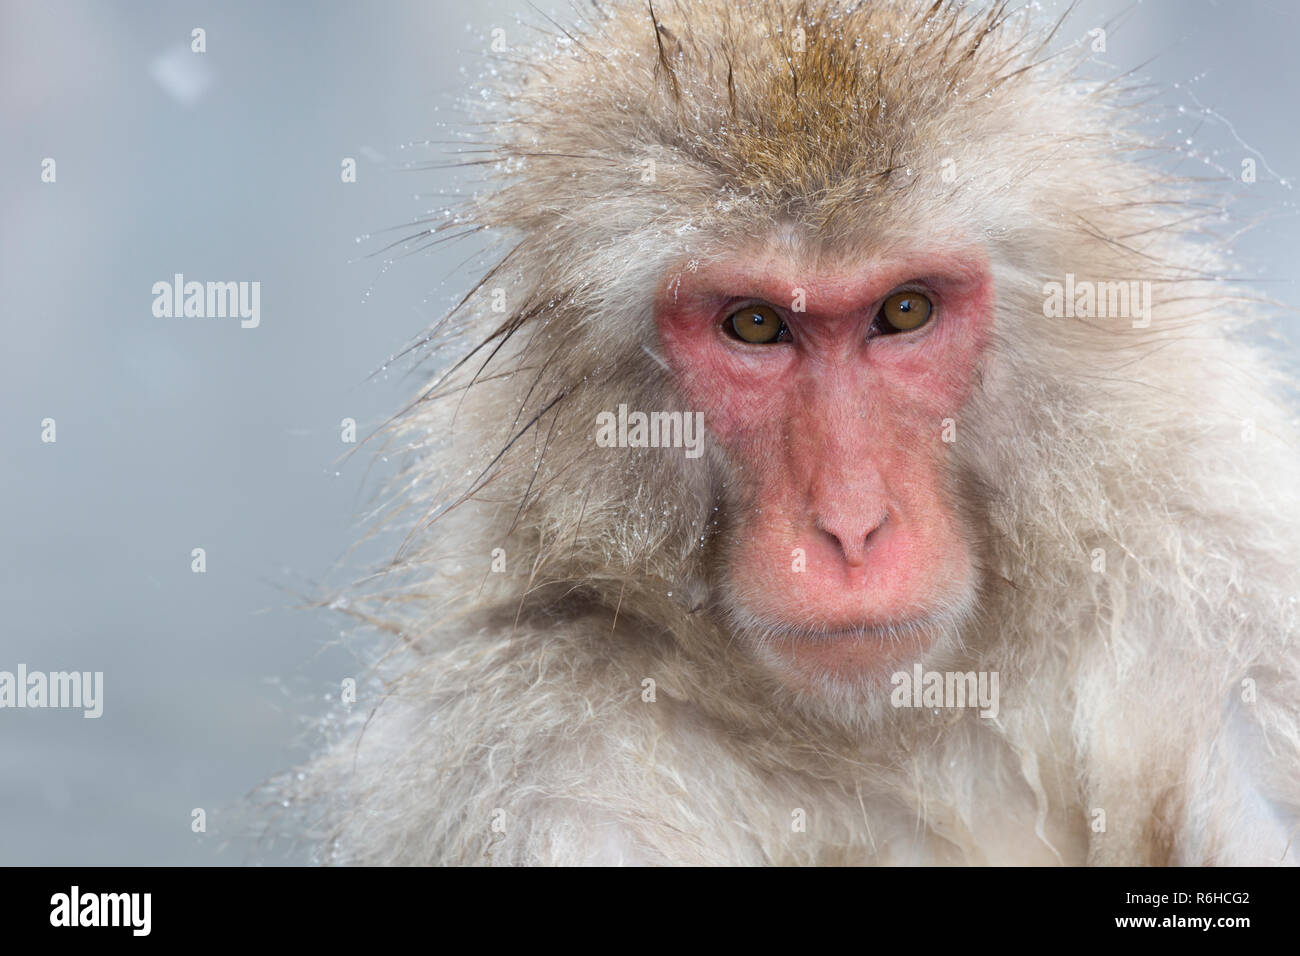 Snow Monkey or Japanese macaque portrait during winter in Nagano Japan Stock Photo